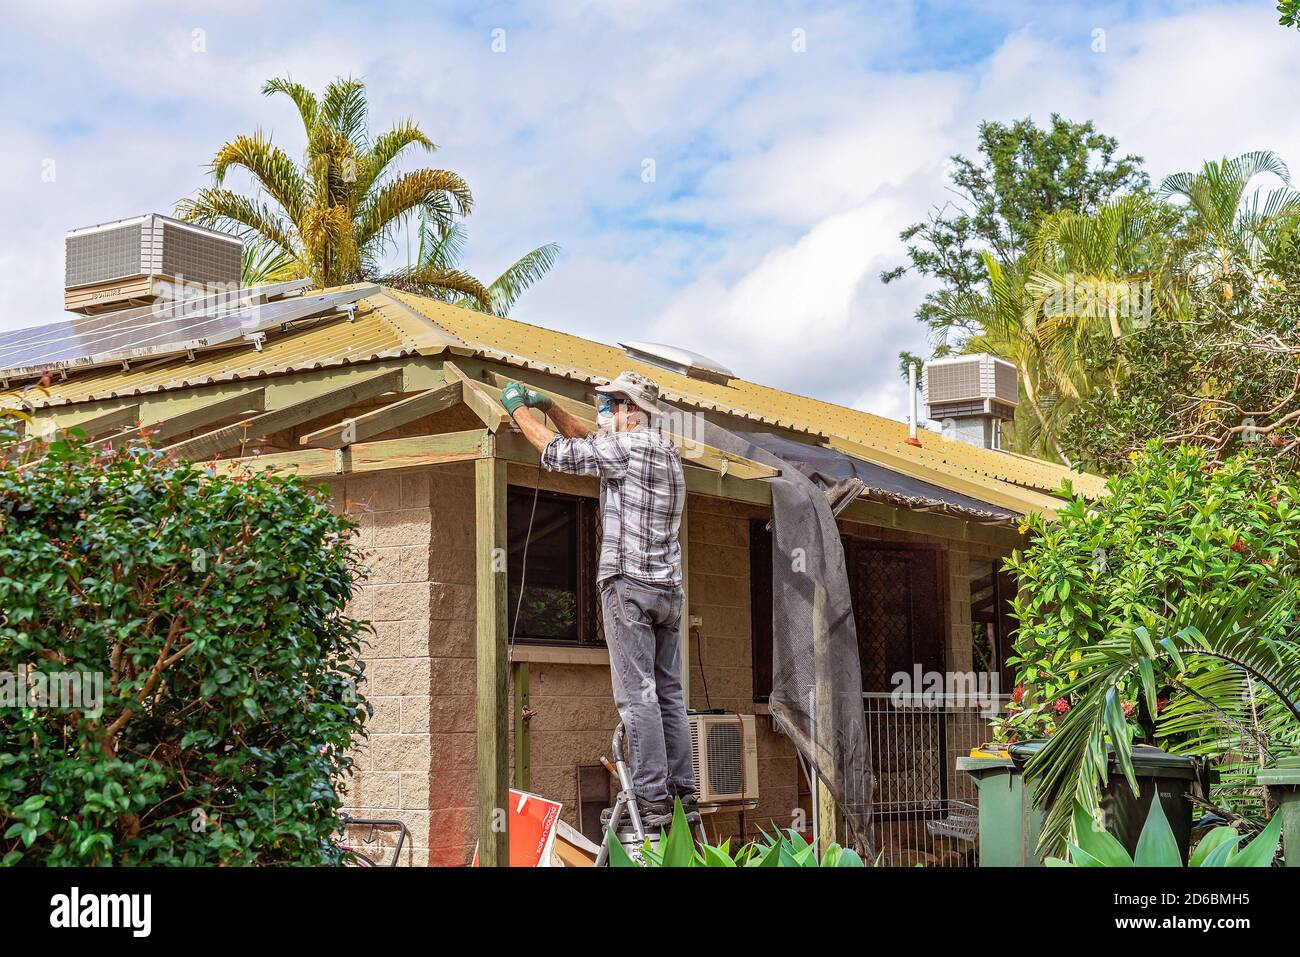 Townsville, Queensland, Australia - June 2020: Man standing on trestles sanding roof rafters of residential house Stock Photo